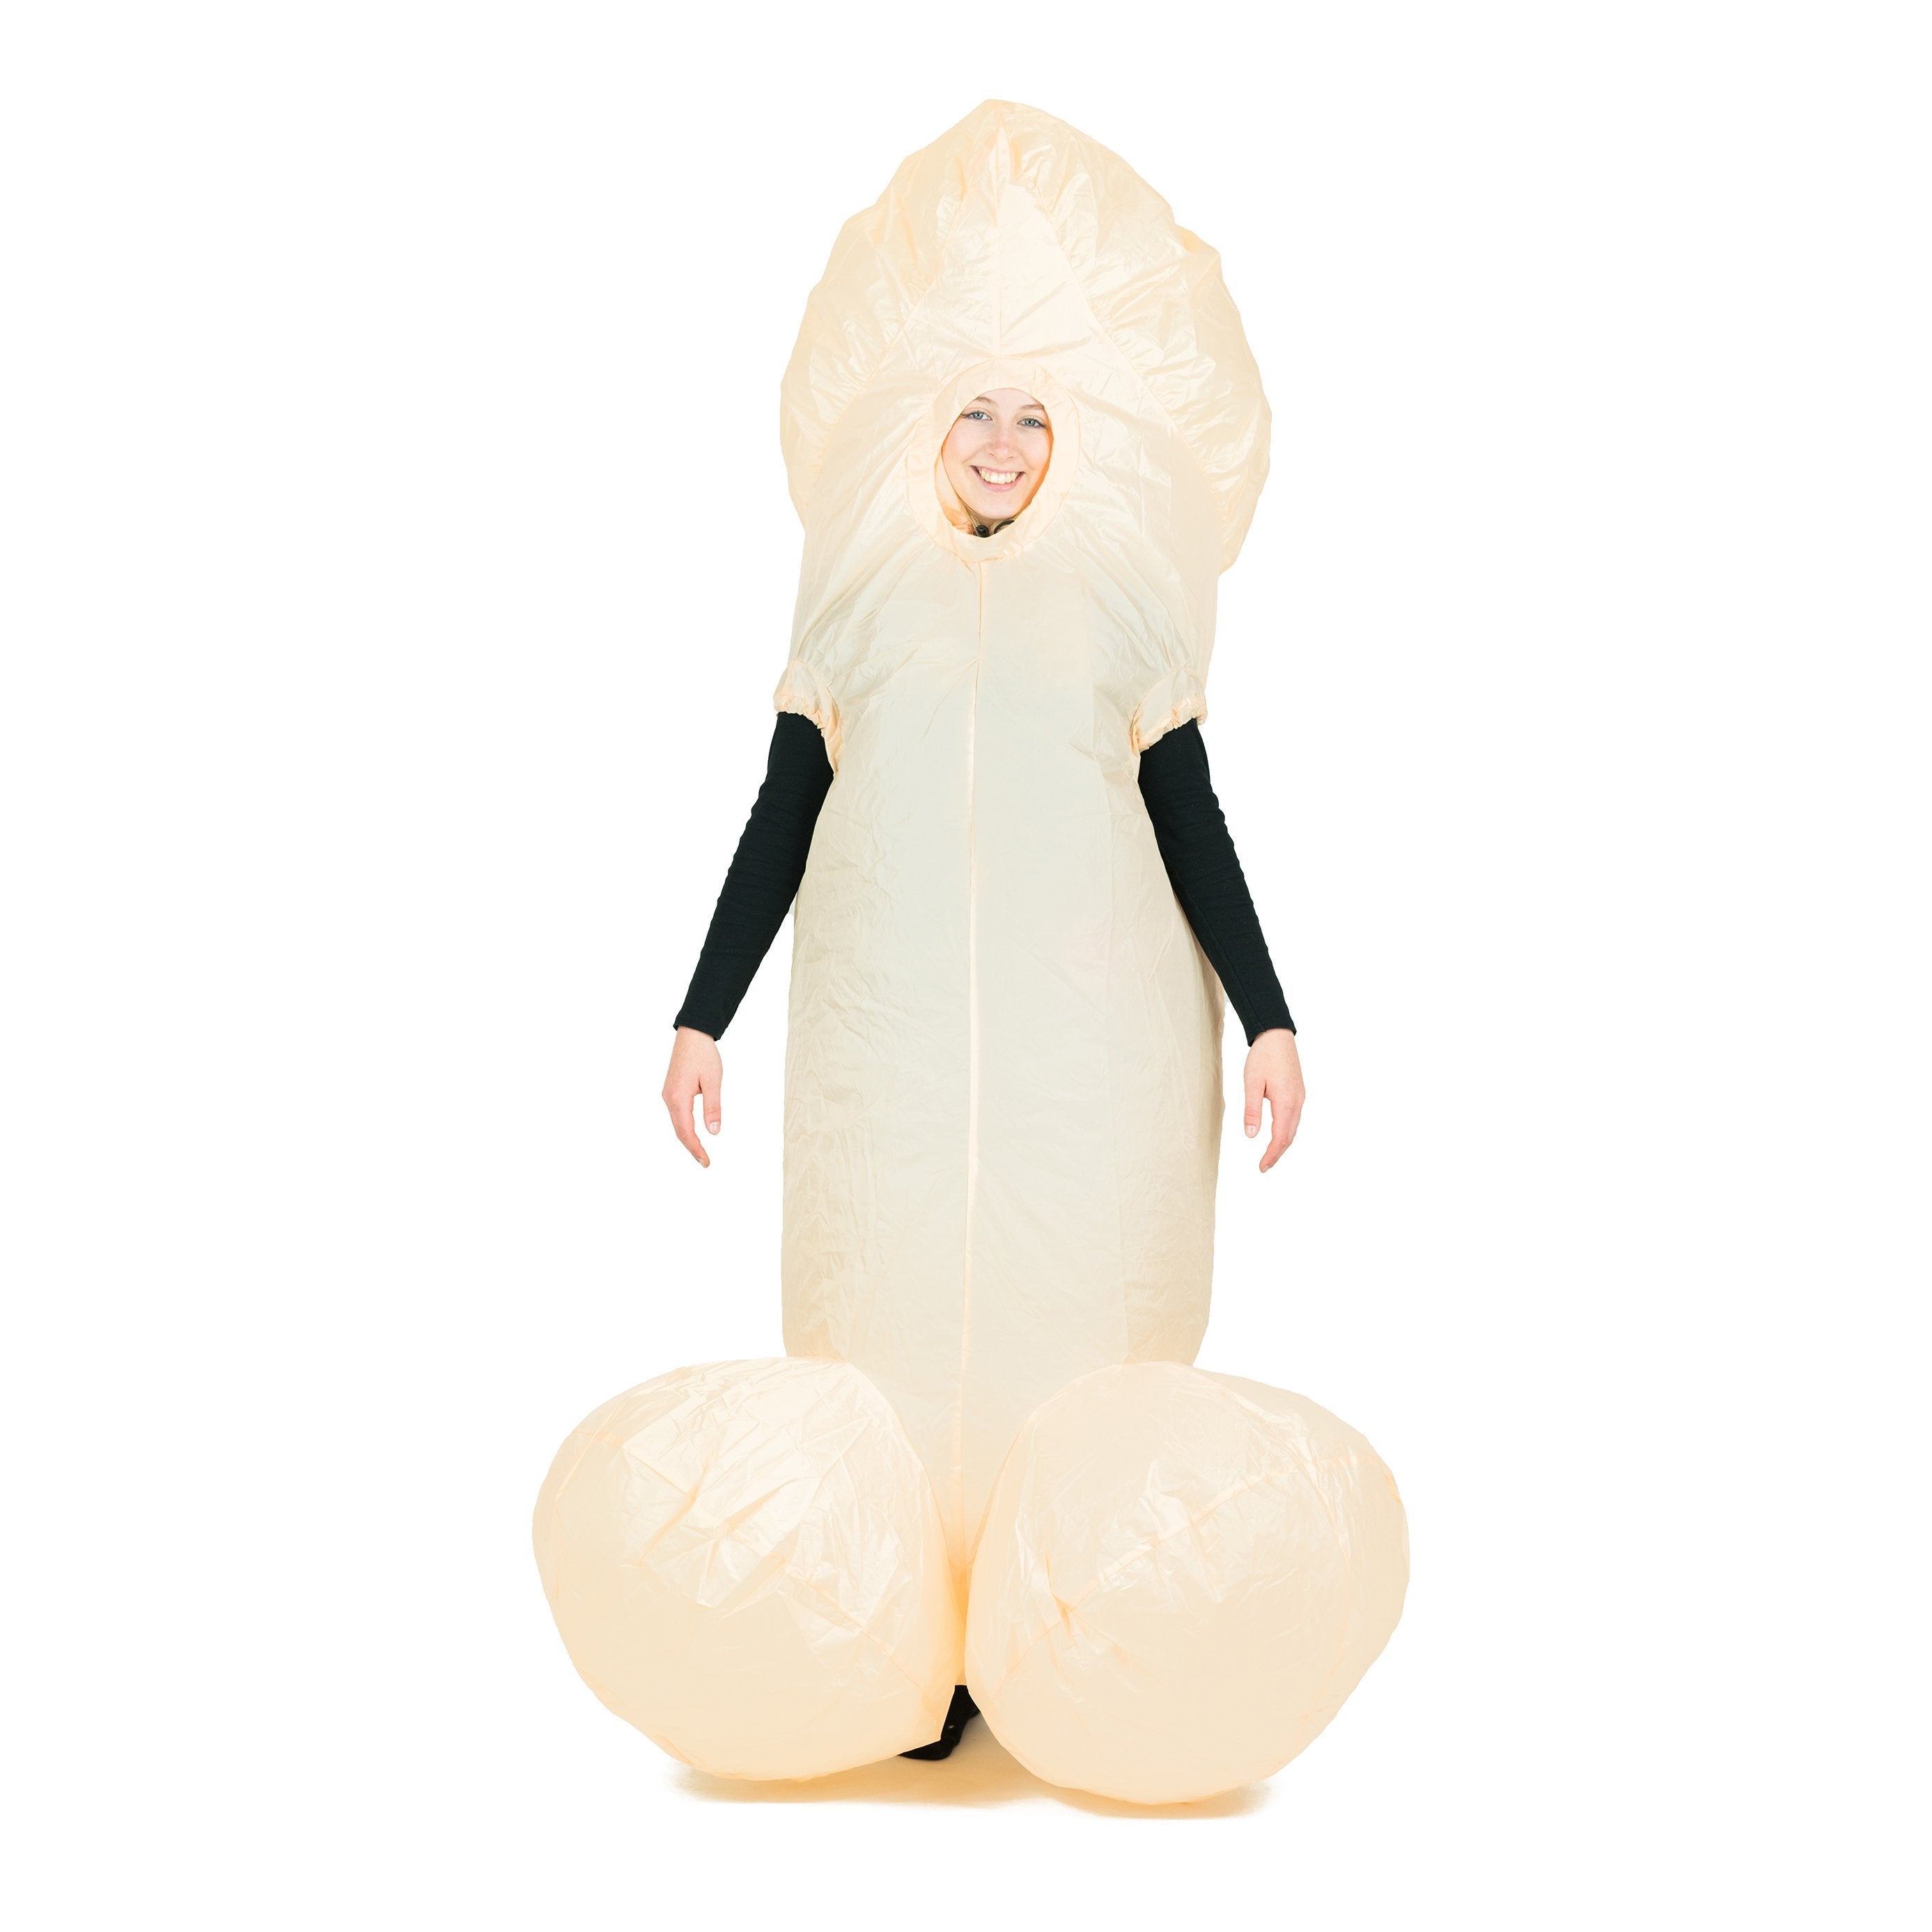 Bodysocks - White Inflatable Willy Costume